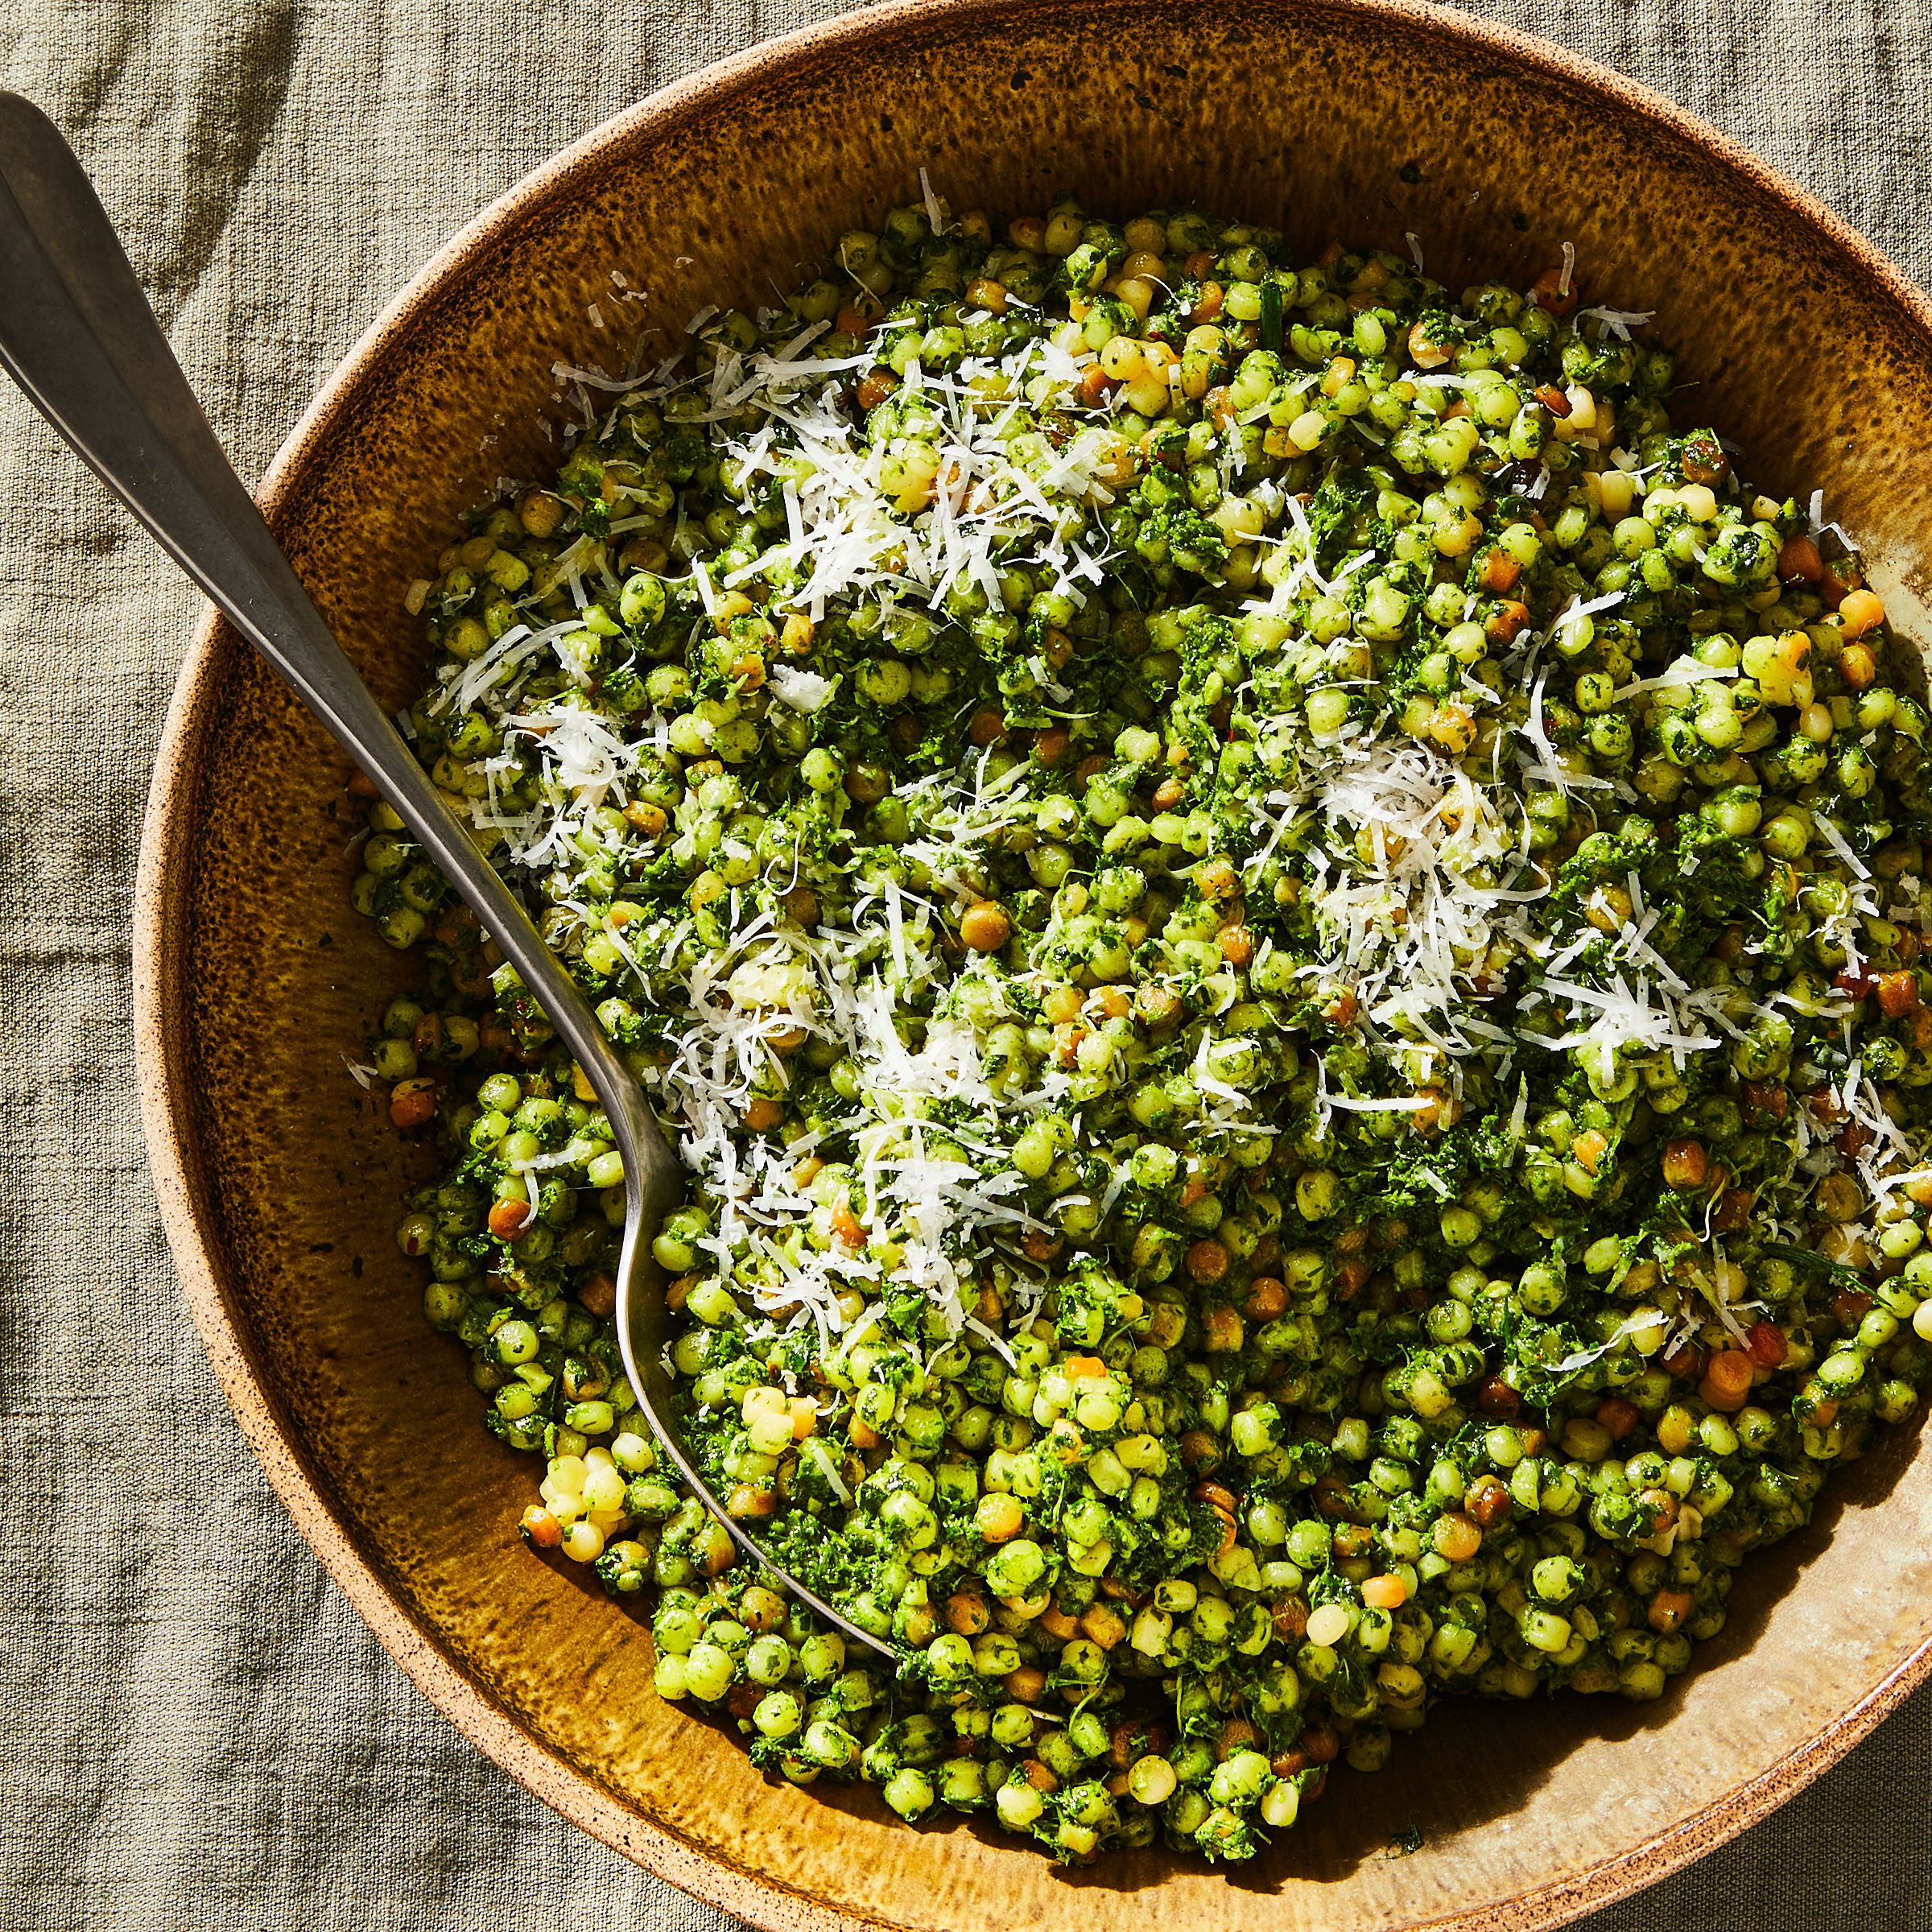 This Fregola Recipe Will Become Your Go-To Pasta Salad This Summer